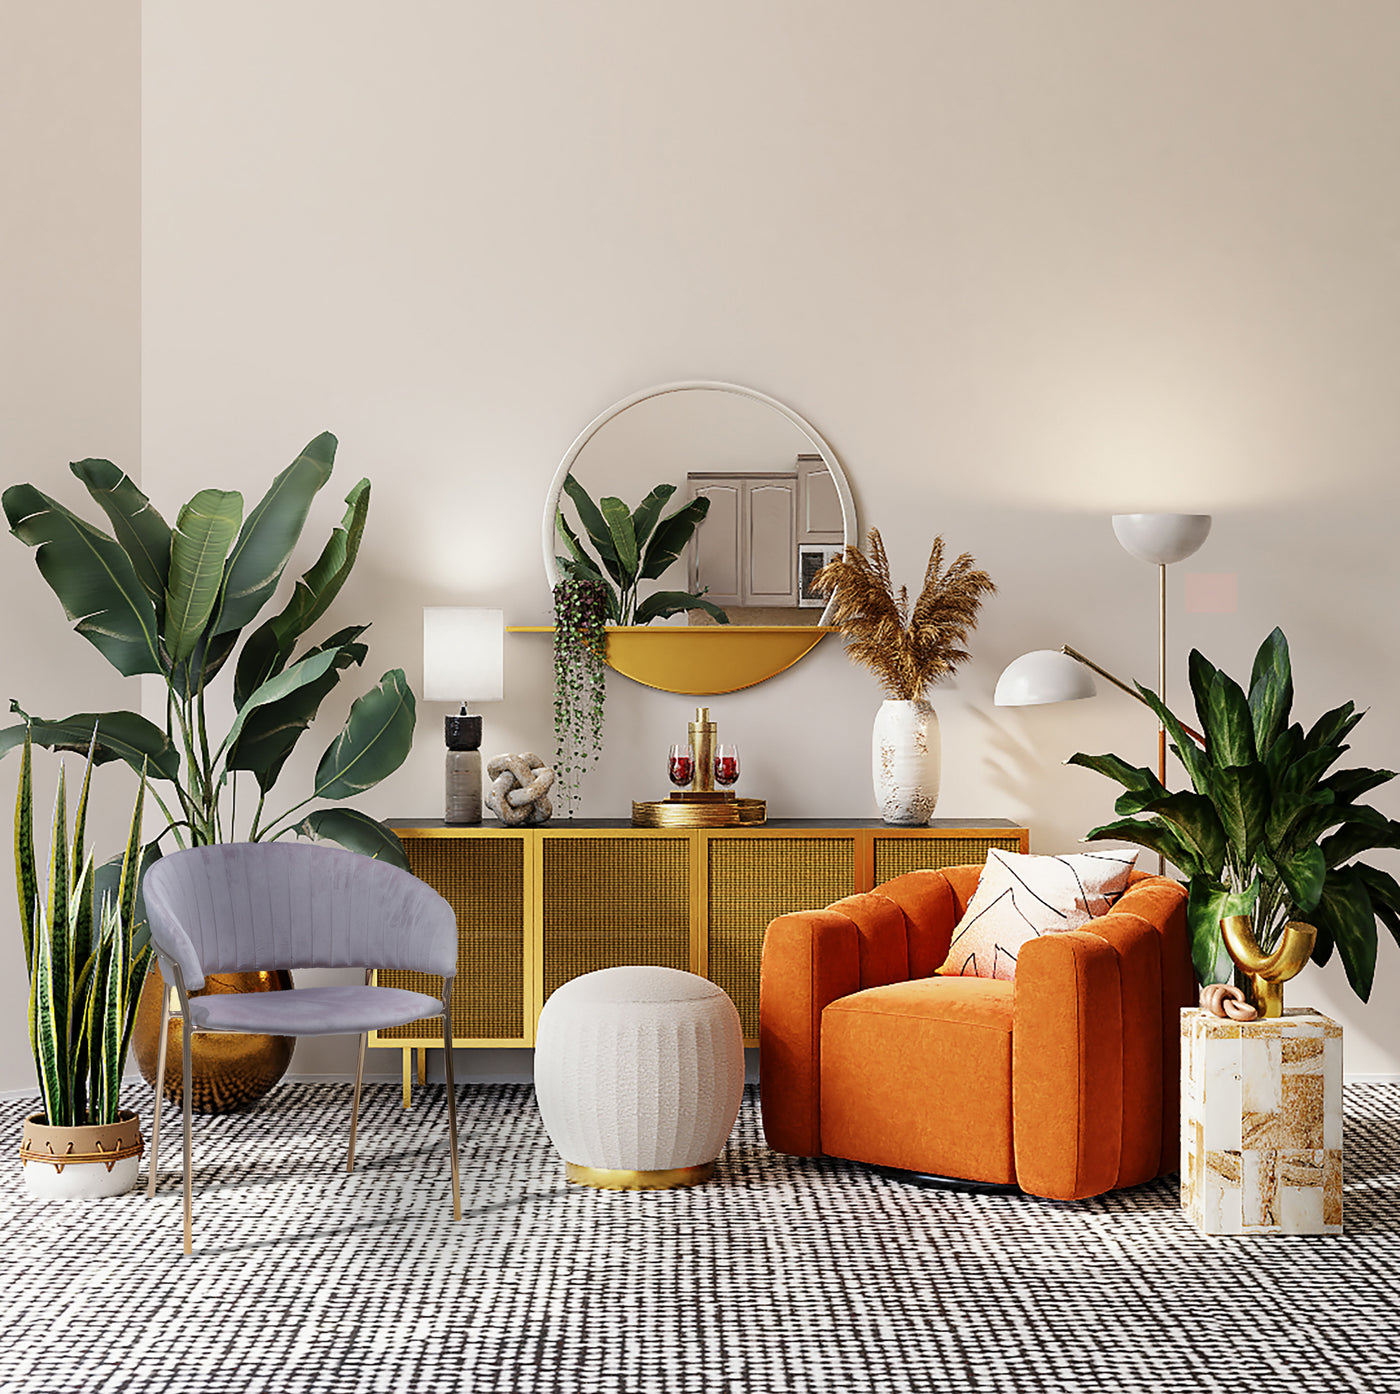 Live-Up To The 2021 Trend Of Accent Furniture From Home360 Stores